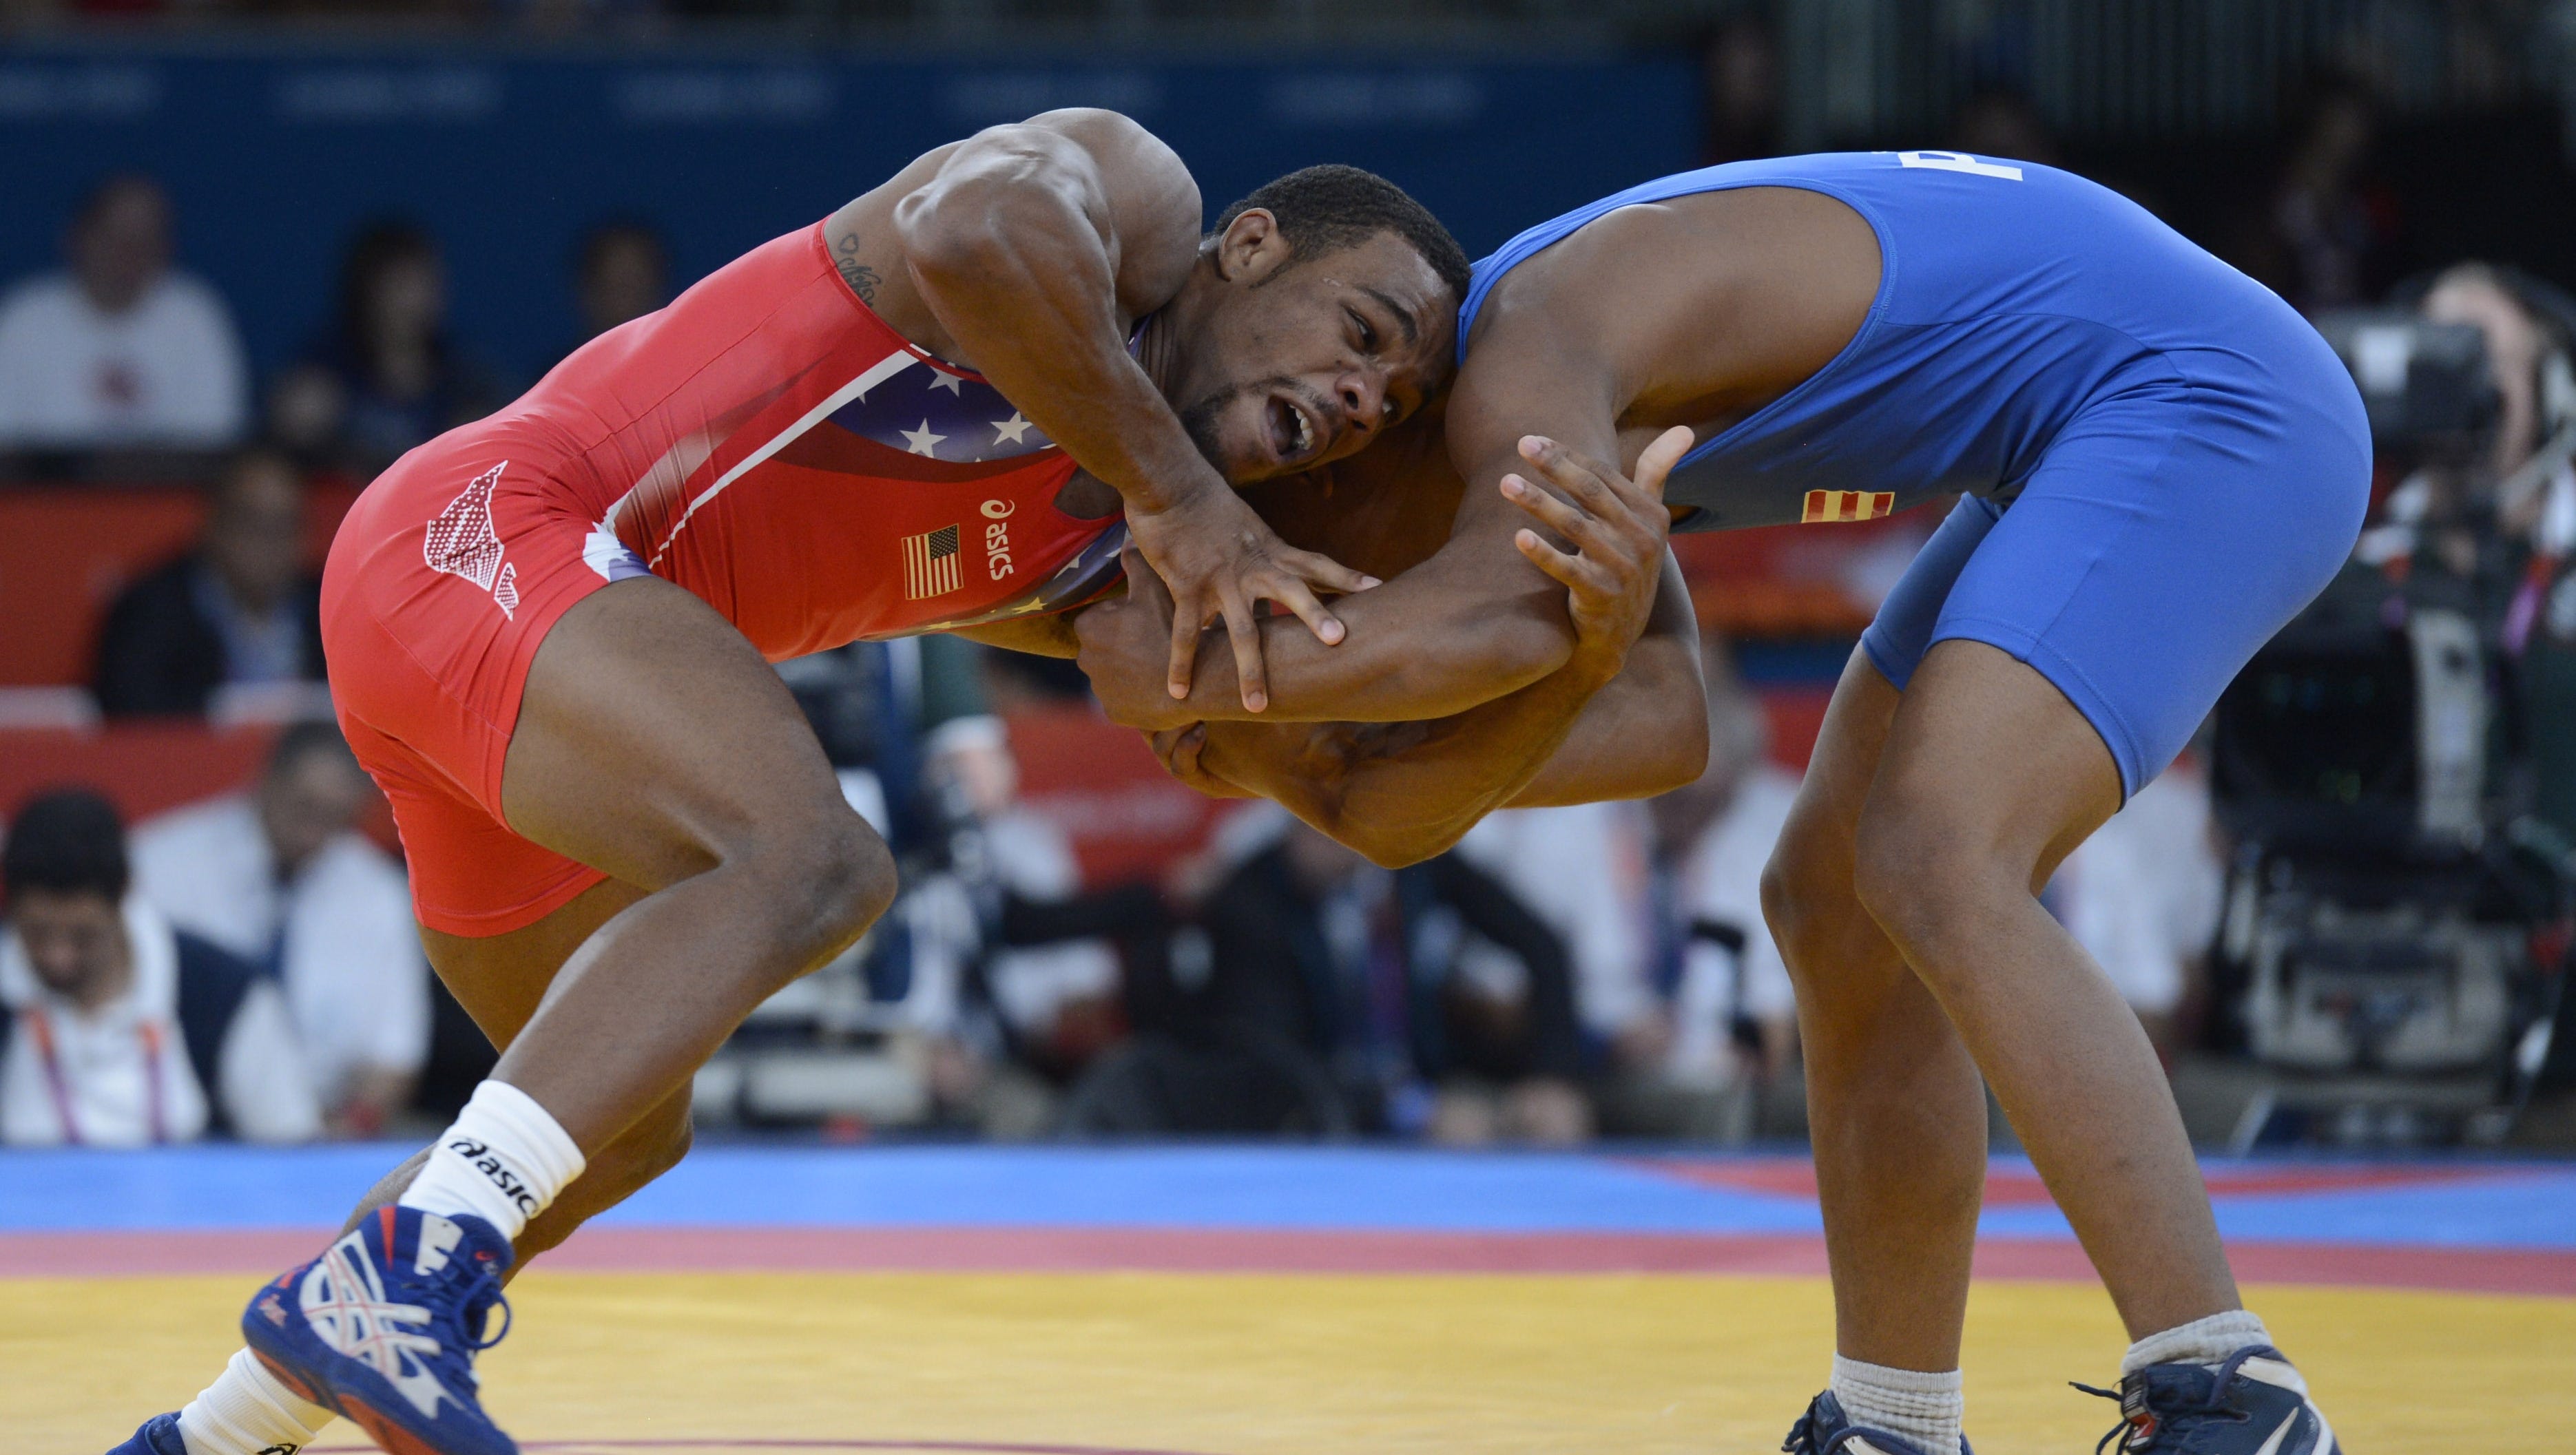 Two wrestlers compete for a gold medal in the Olympic Games.